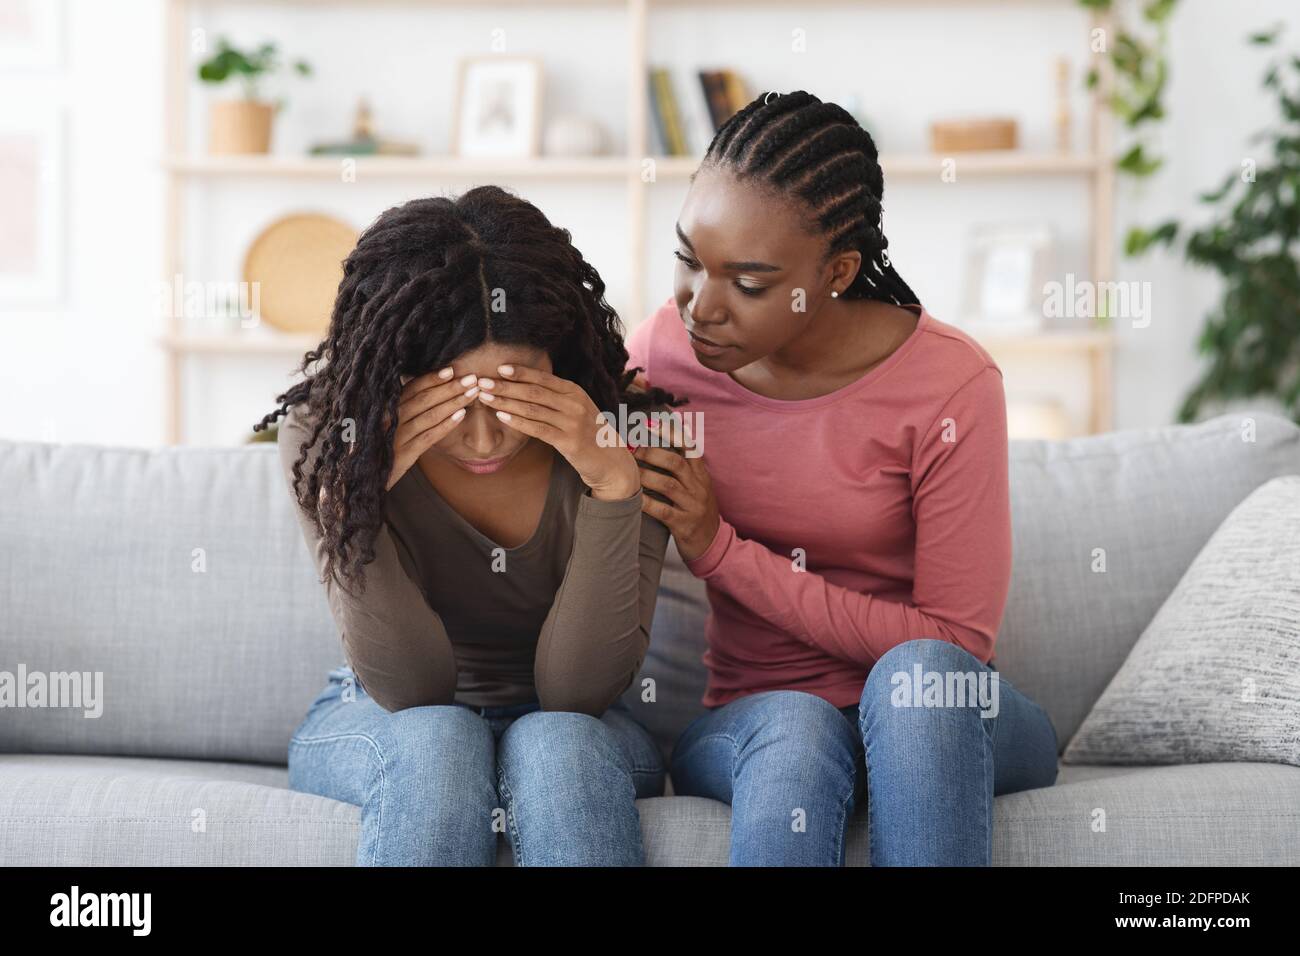 Attentive african american lady comforting her upset friend Stock Photo